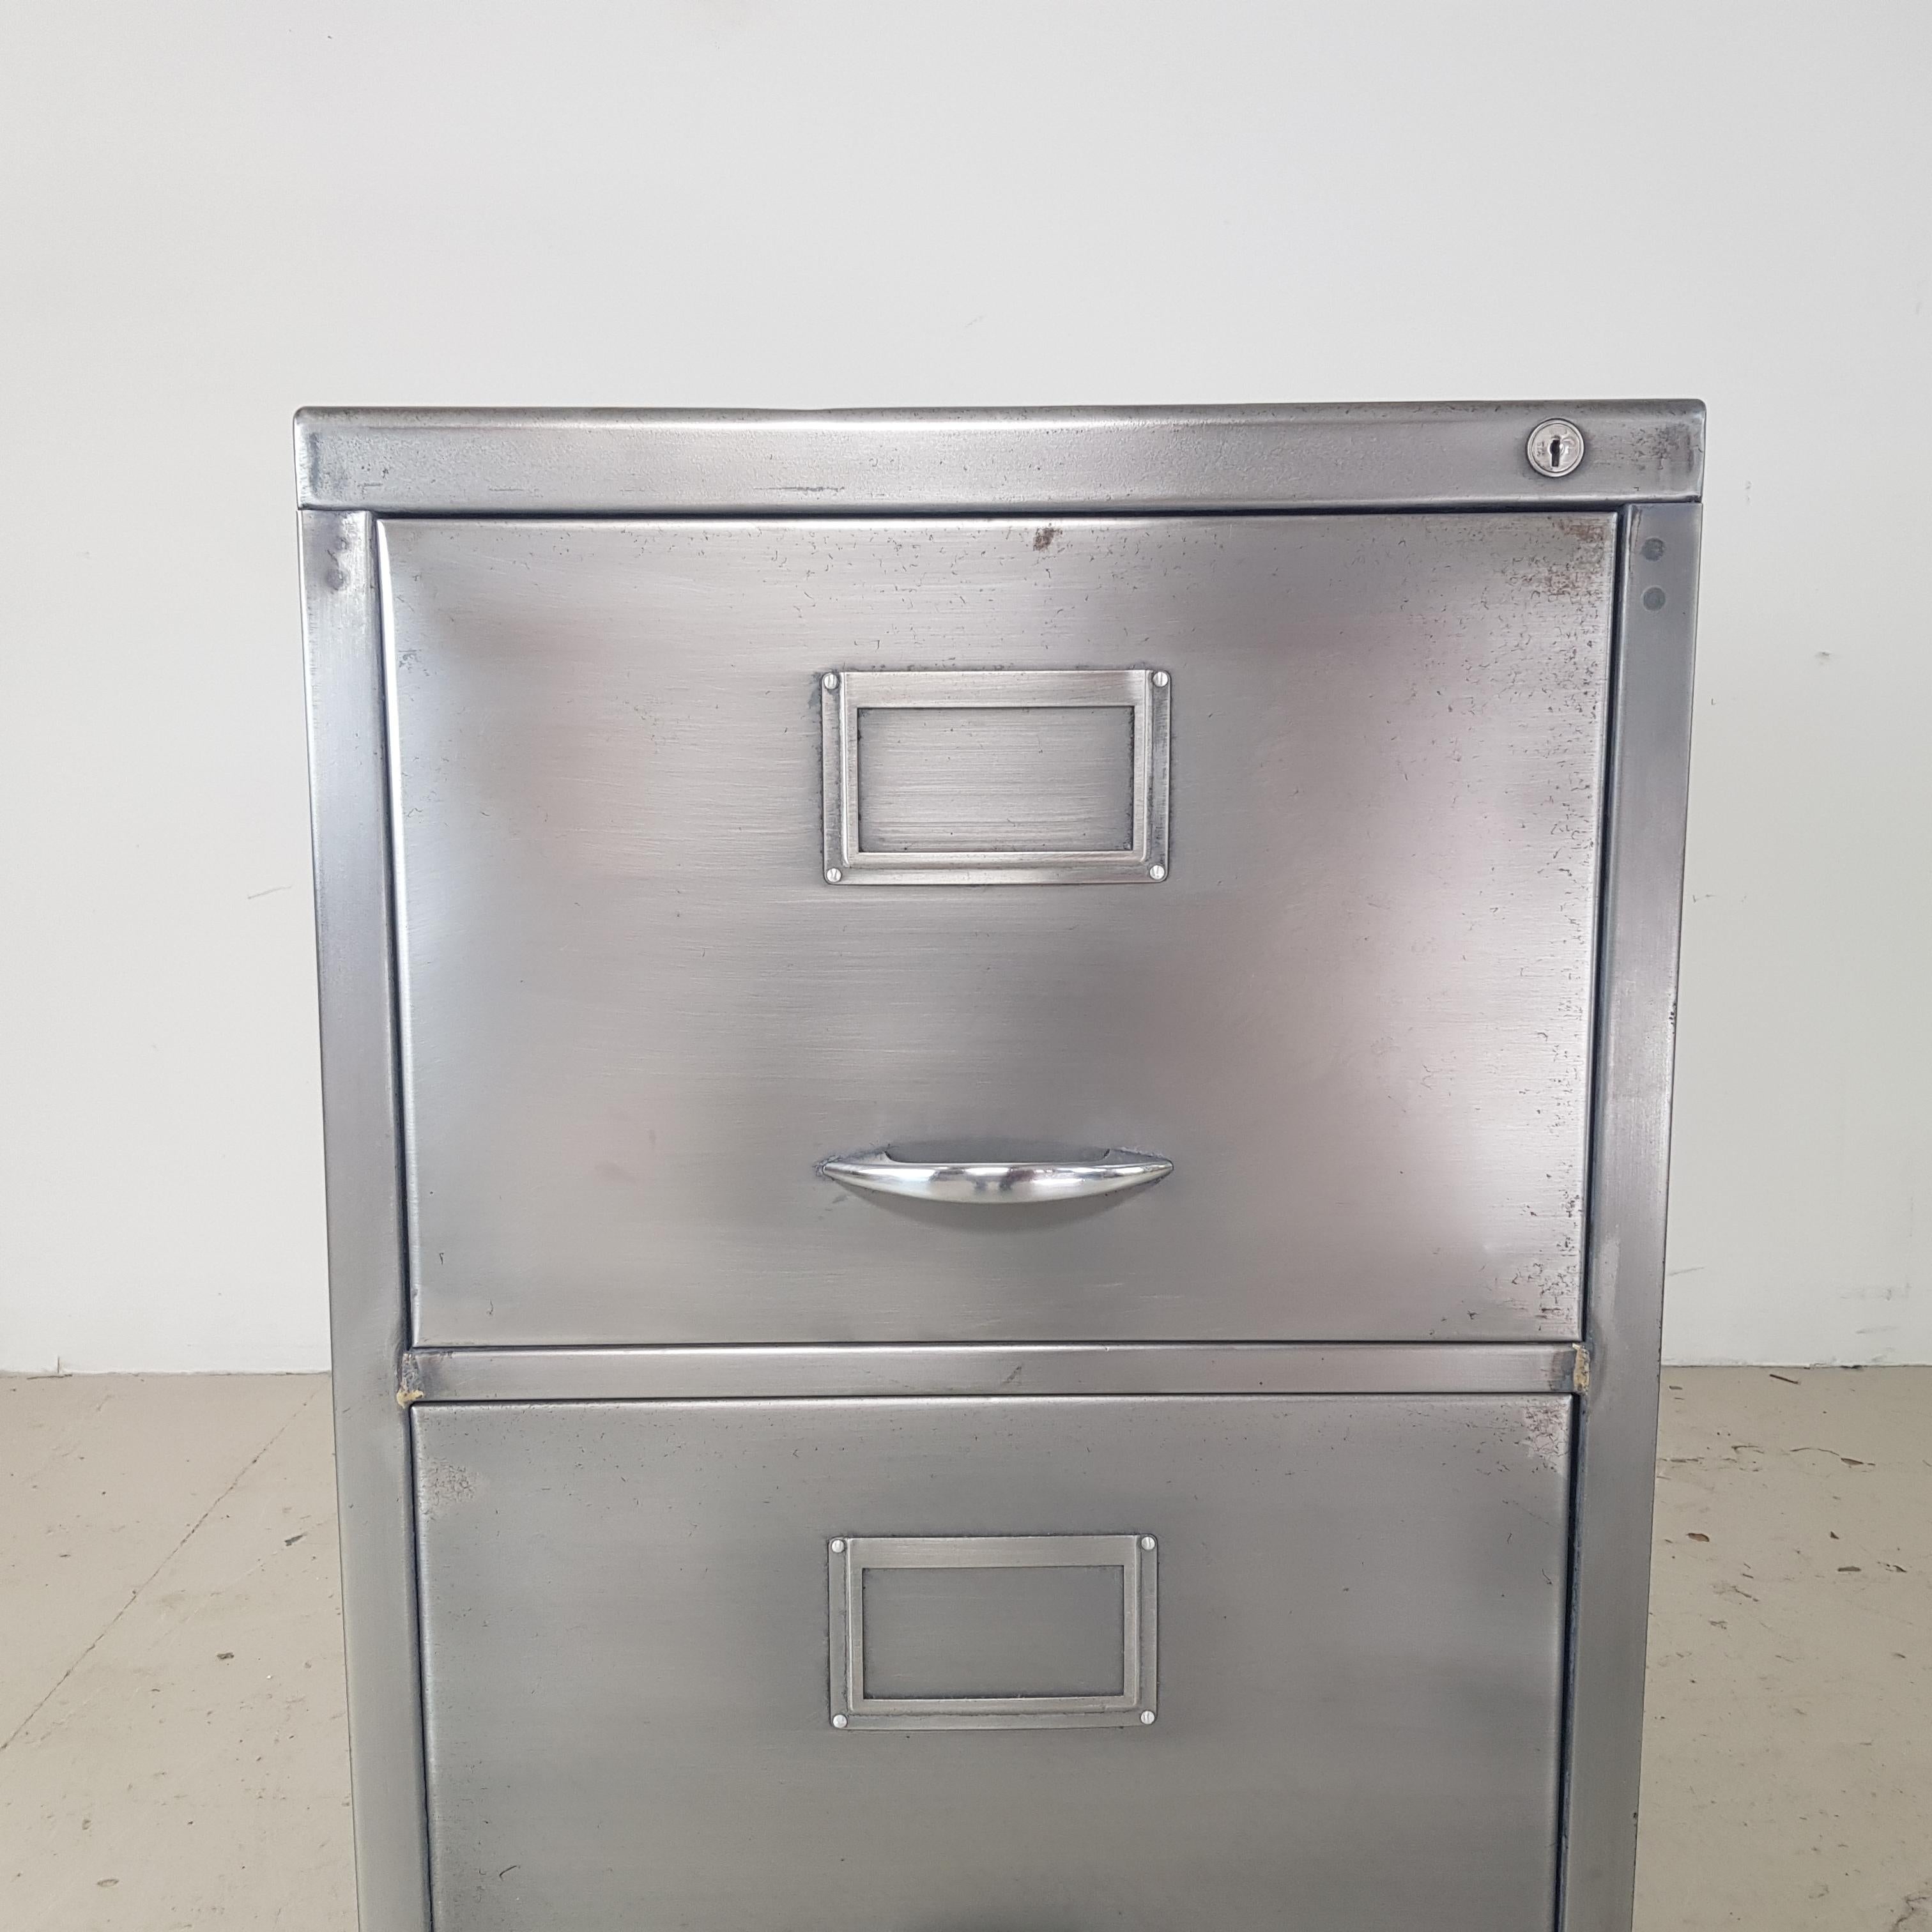 Vintage stripped and polished steel 2-drawer filing cabinet with metal handles. 

The interior is in its original finish. As it's a vintage piece, coming from a working environment, there are signs of wear and tear - a few scratches, scuffs and